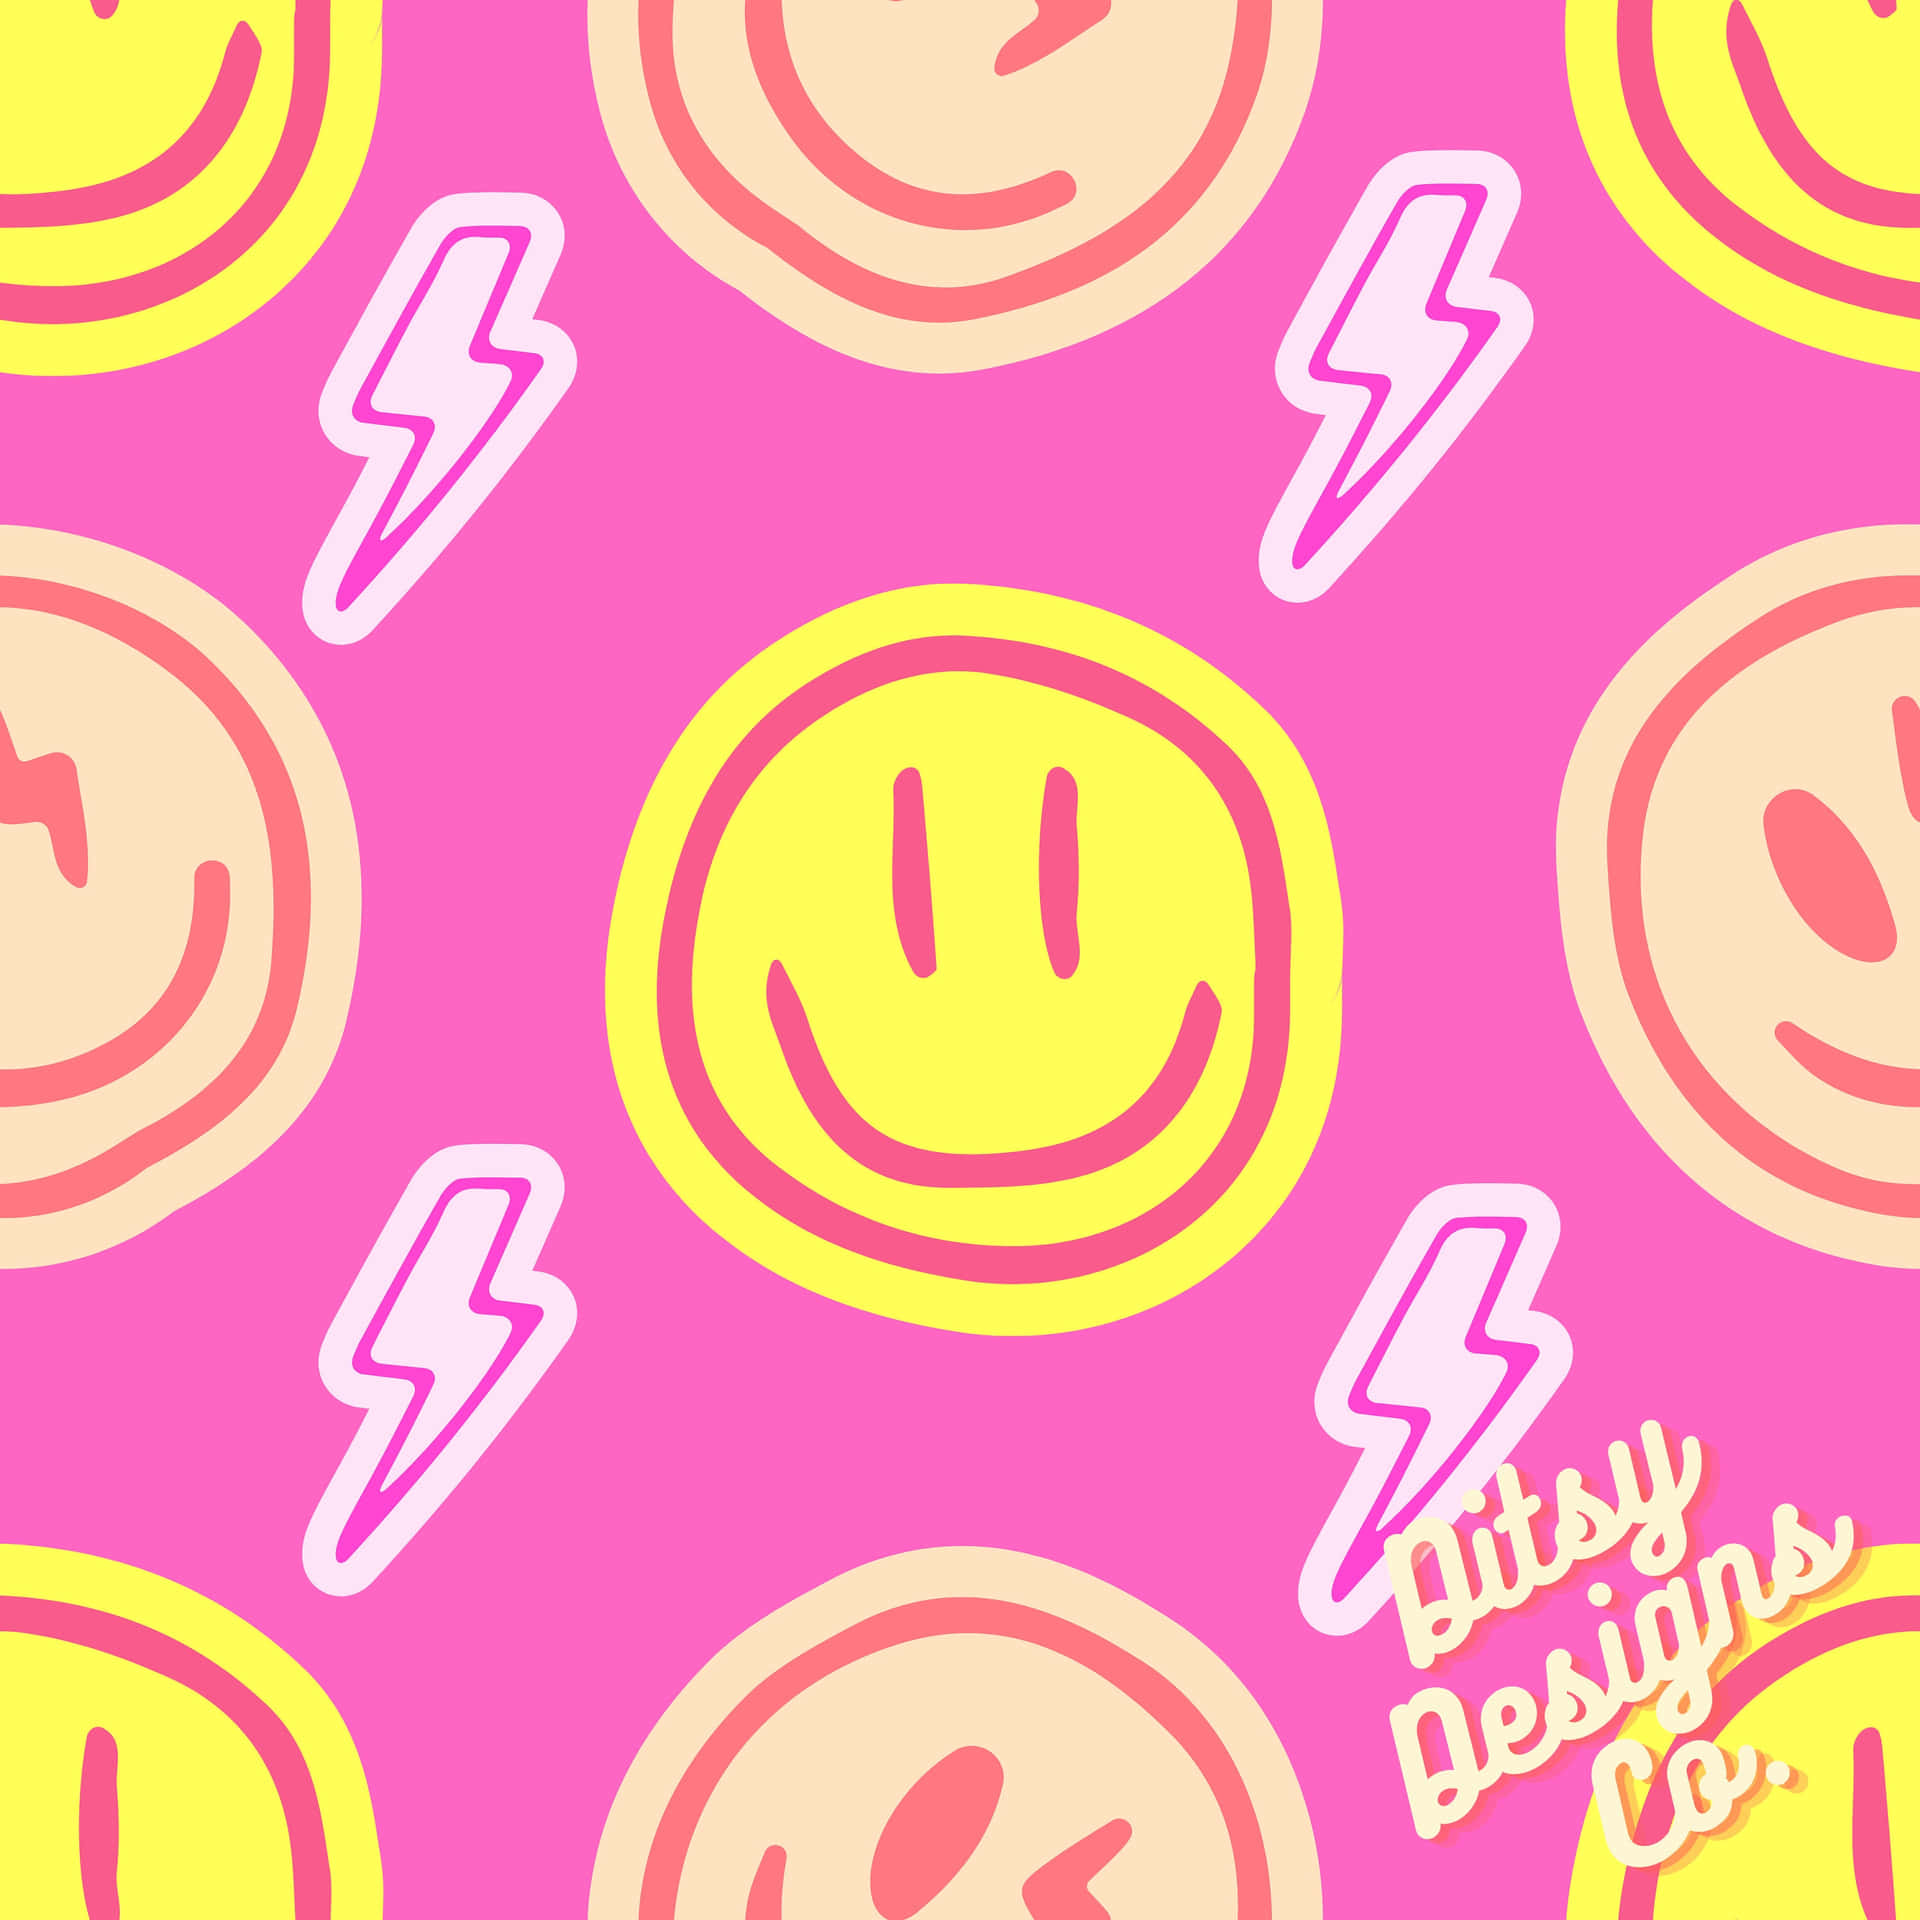 Brighten your day with cute neon pink Wallpaper